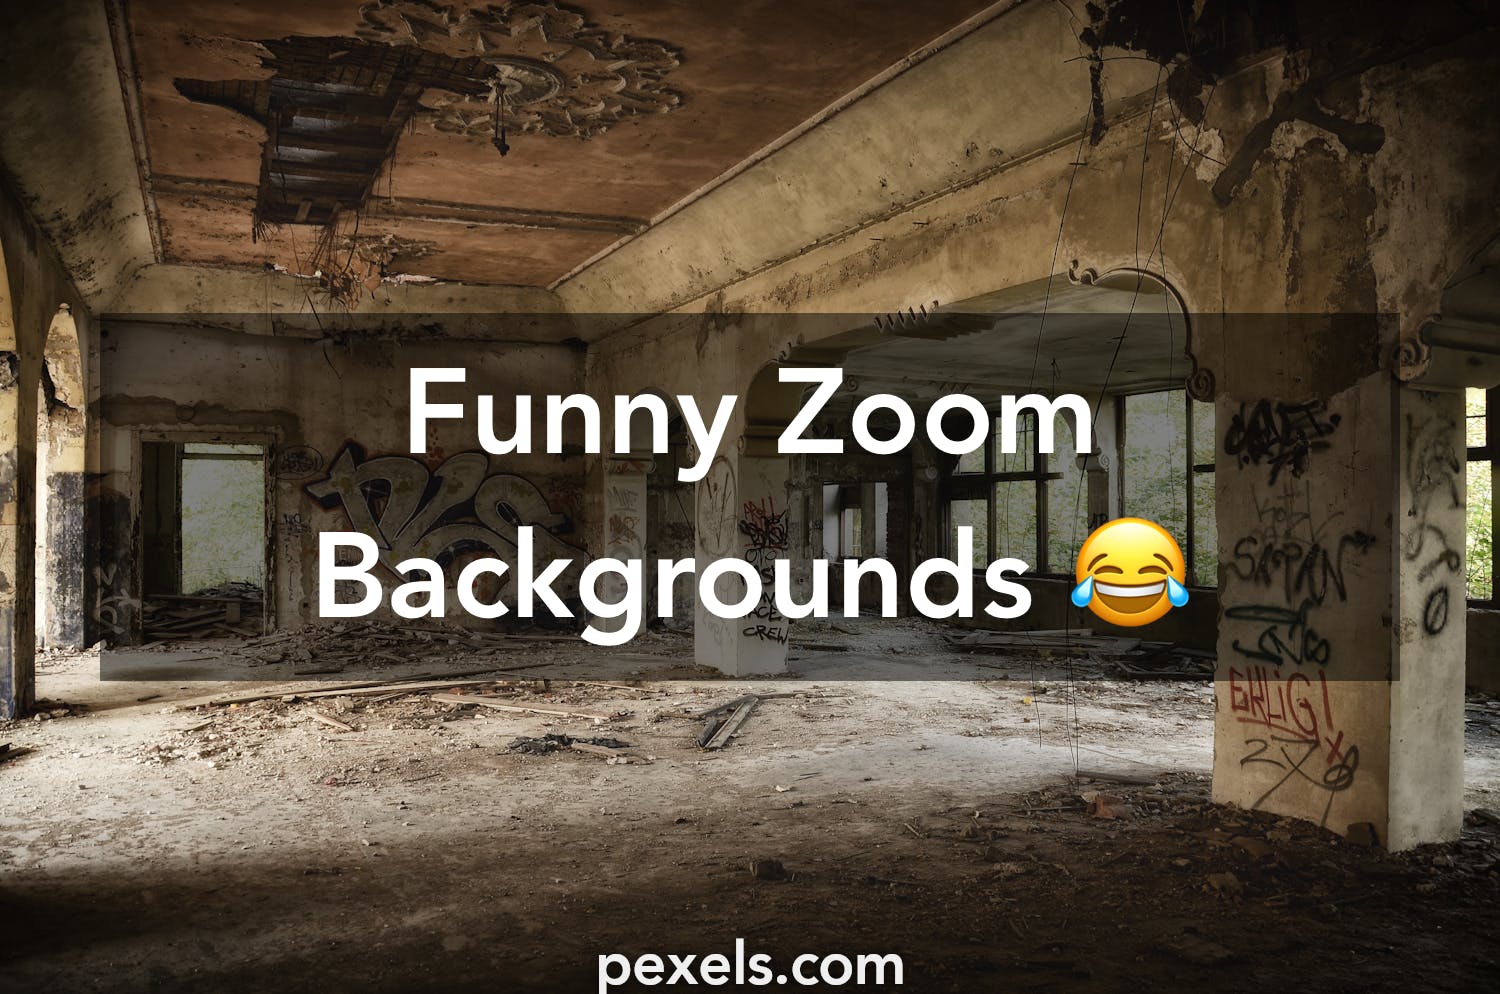  Funny Zoom Backgrounds    Pexels